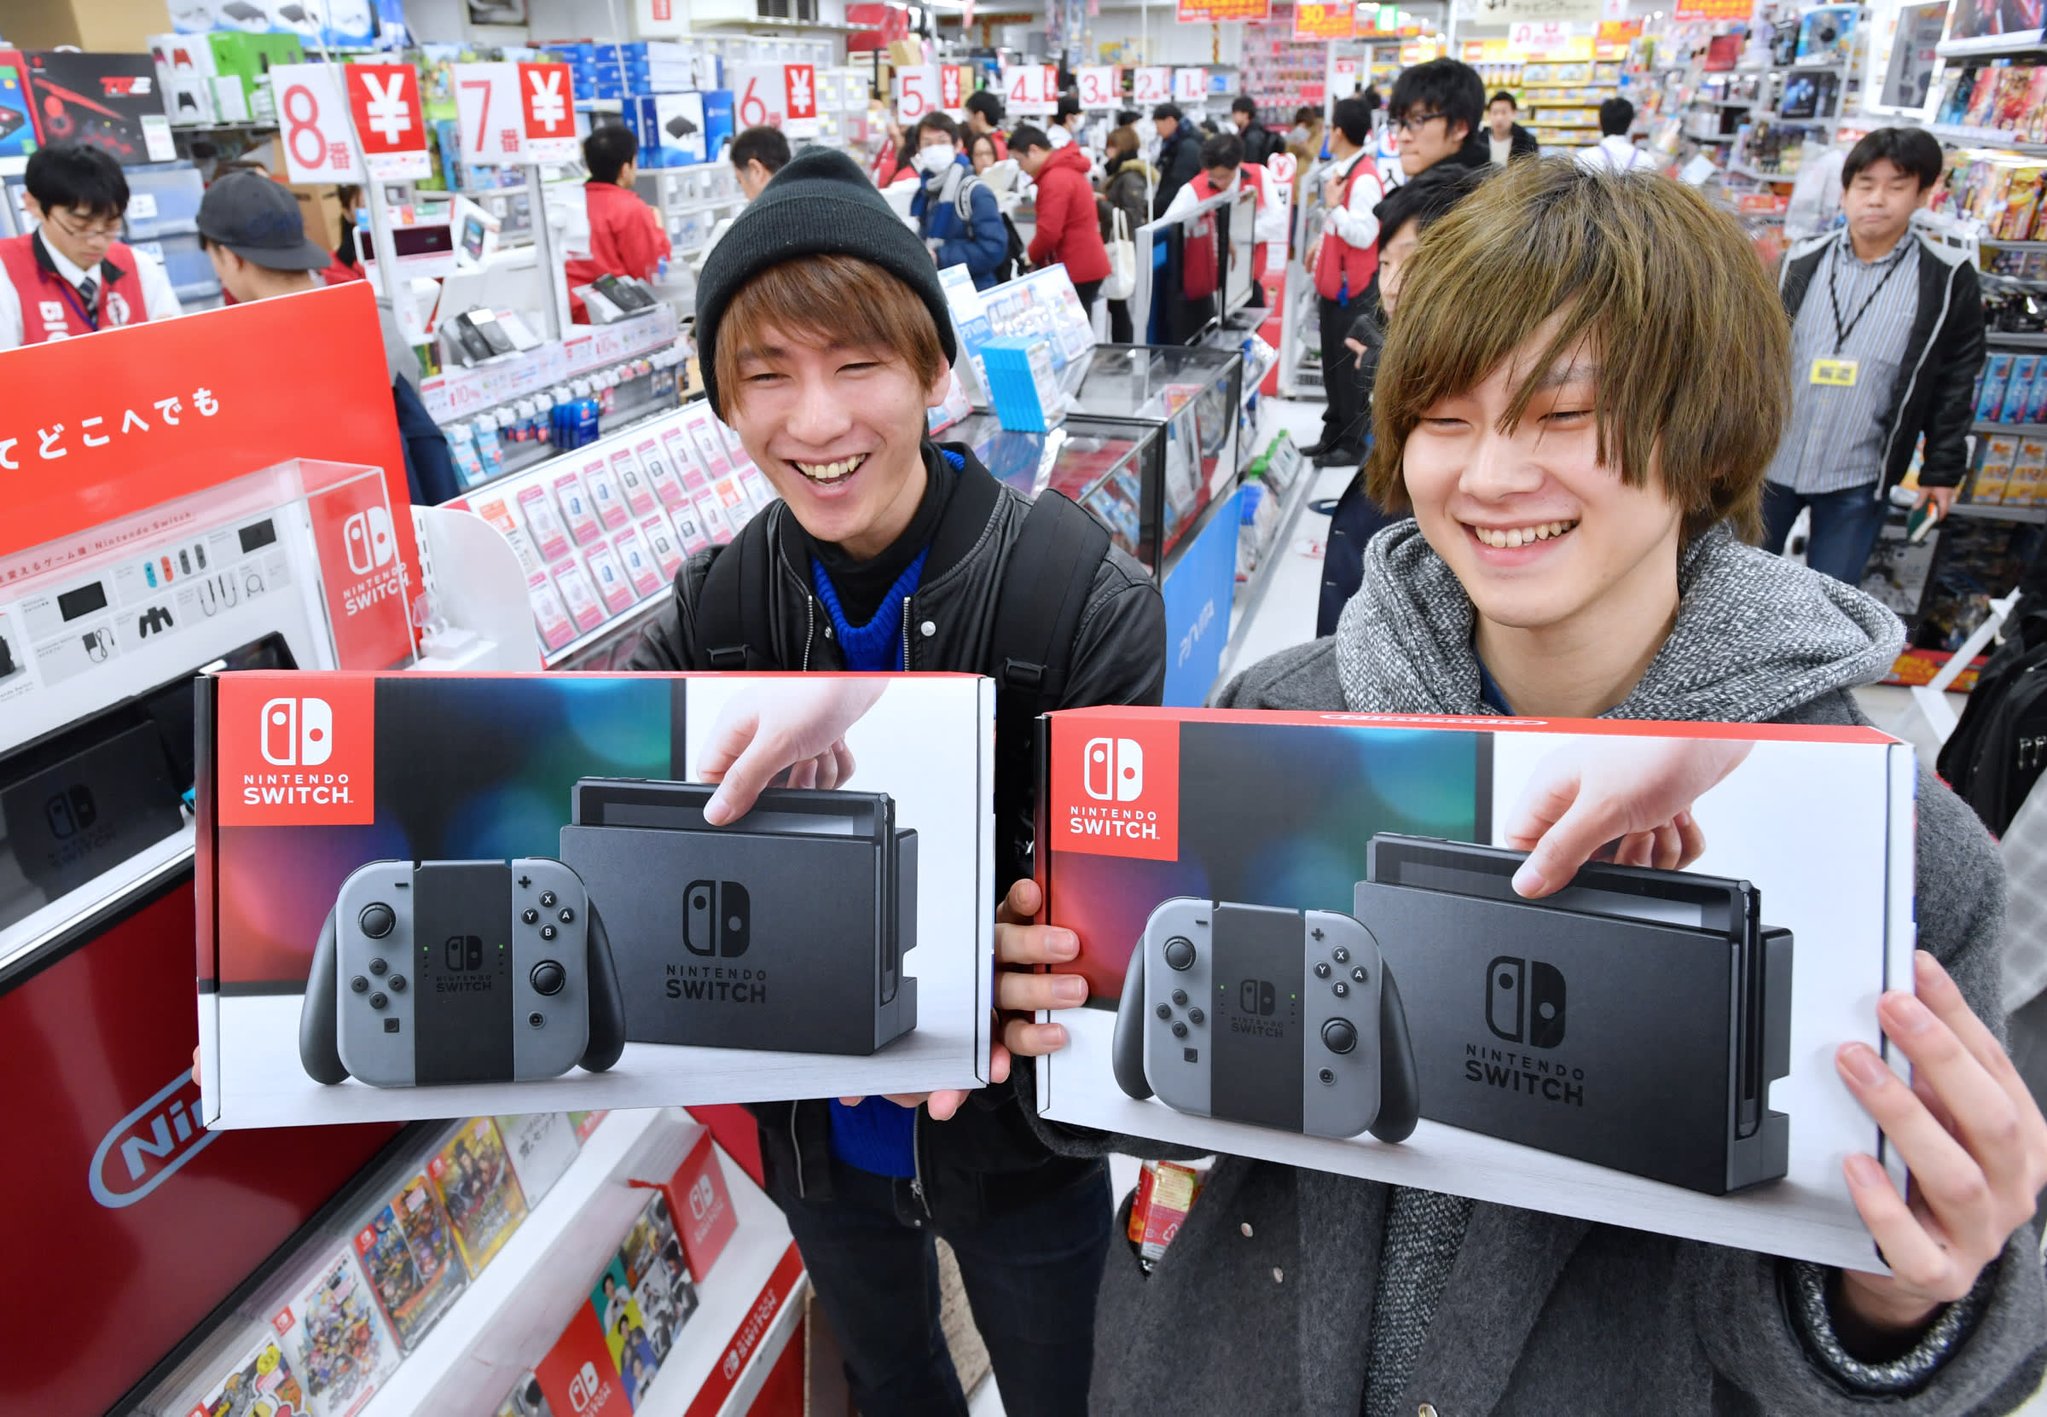 35 Best Selling Nintendo Switch in Japan for 4 Years

